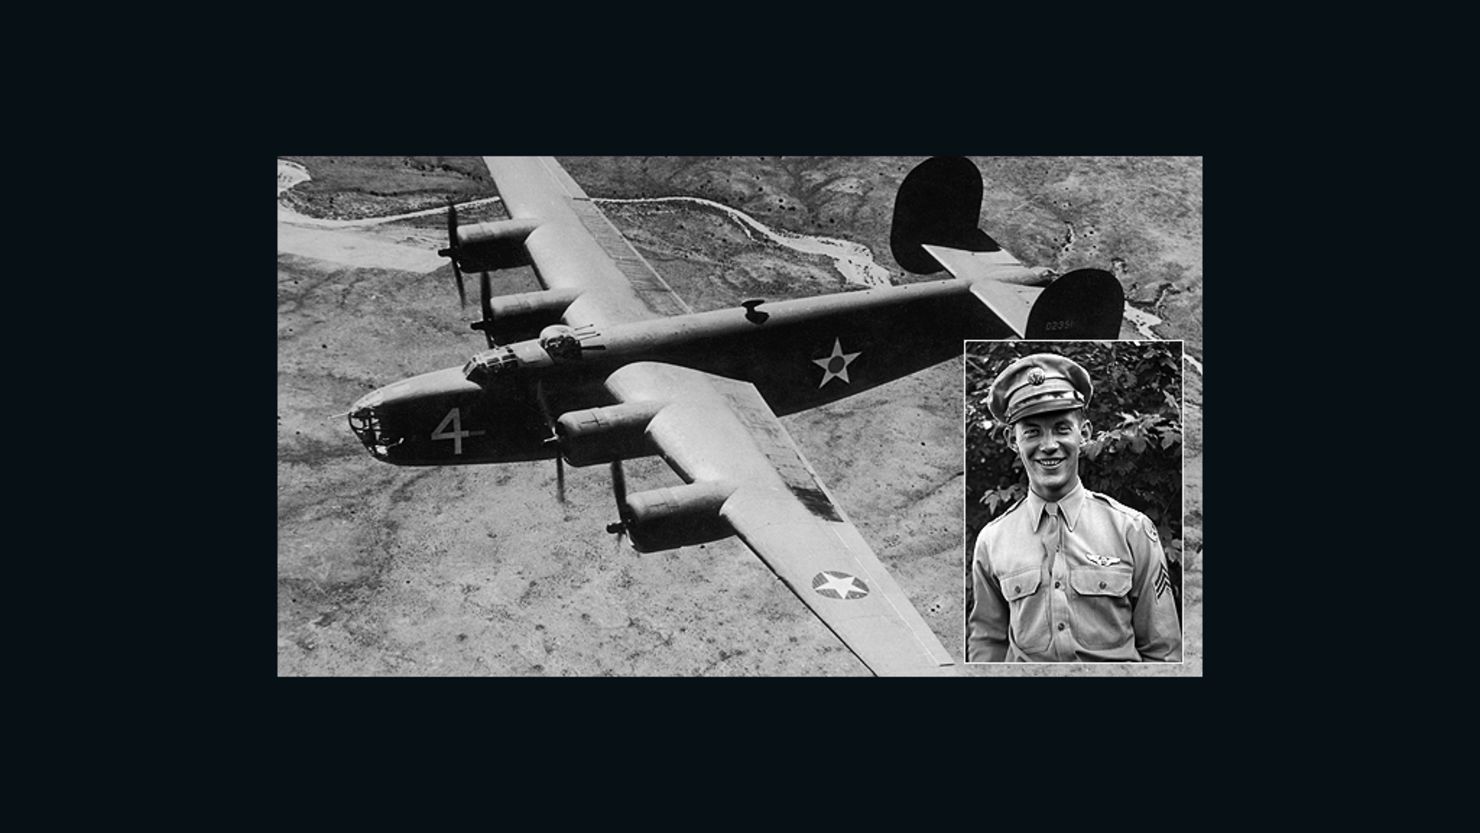 Staff Sergeant Larry Grasha and a file image of a B-24 Liberator bomber. Grasha's B-24 plane and its eight crew disappeared in 1944.